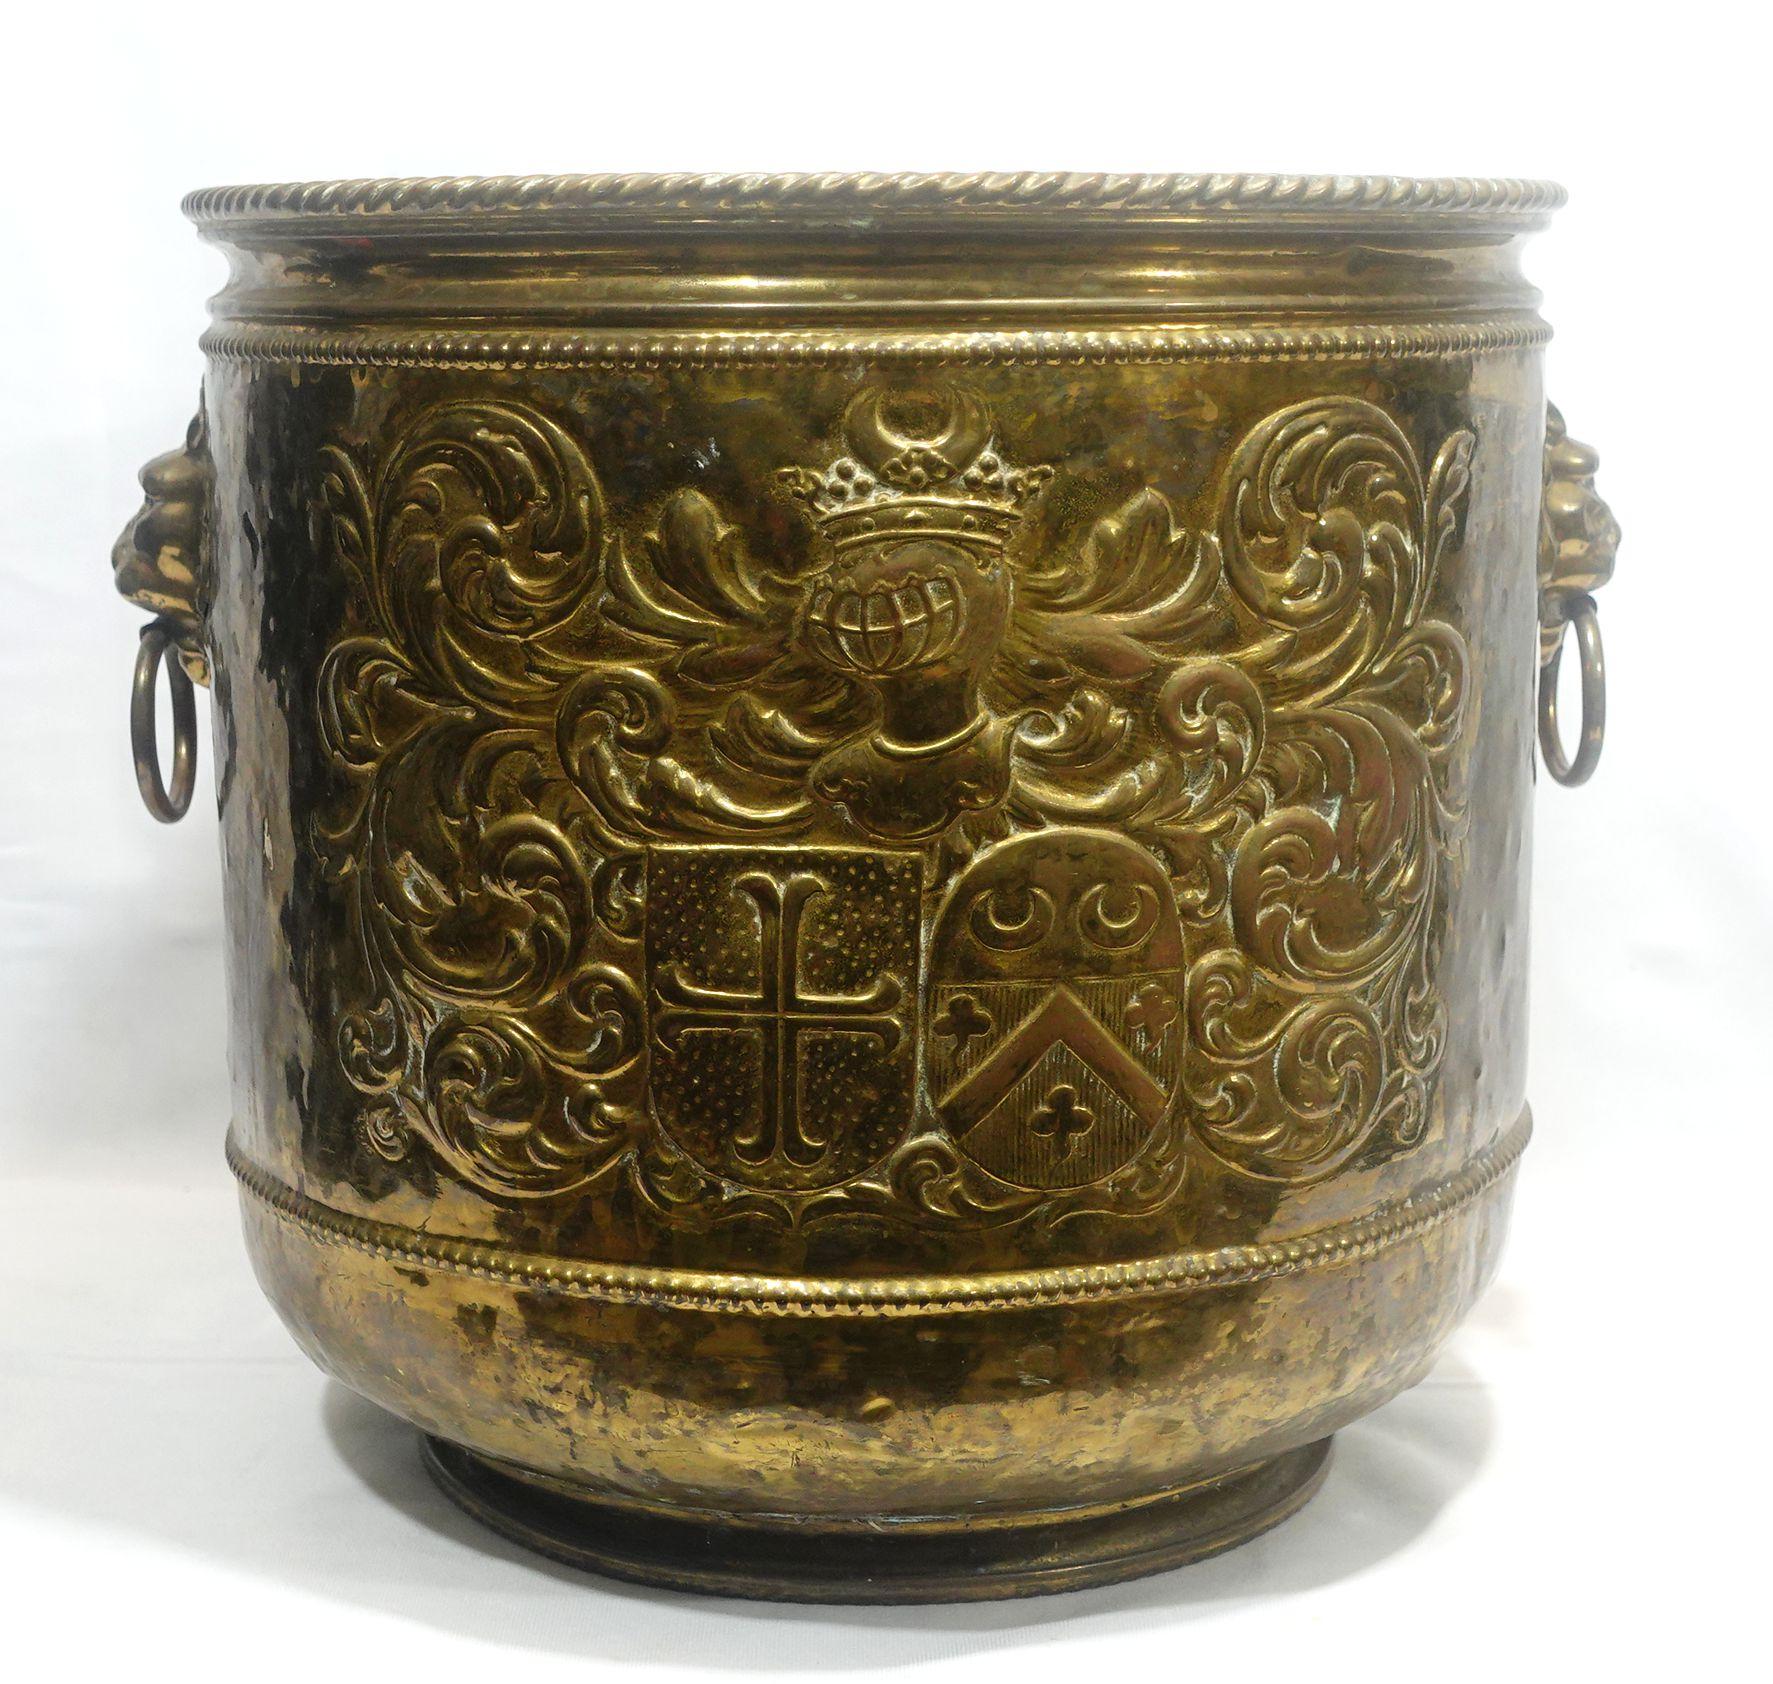 Antique Large Brass Firewood Bucket w/Repousse of Armorial Patterns, and the Lion Head handles.
This is a very delicate hand-made bucket from the 19th century. 